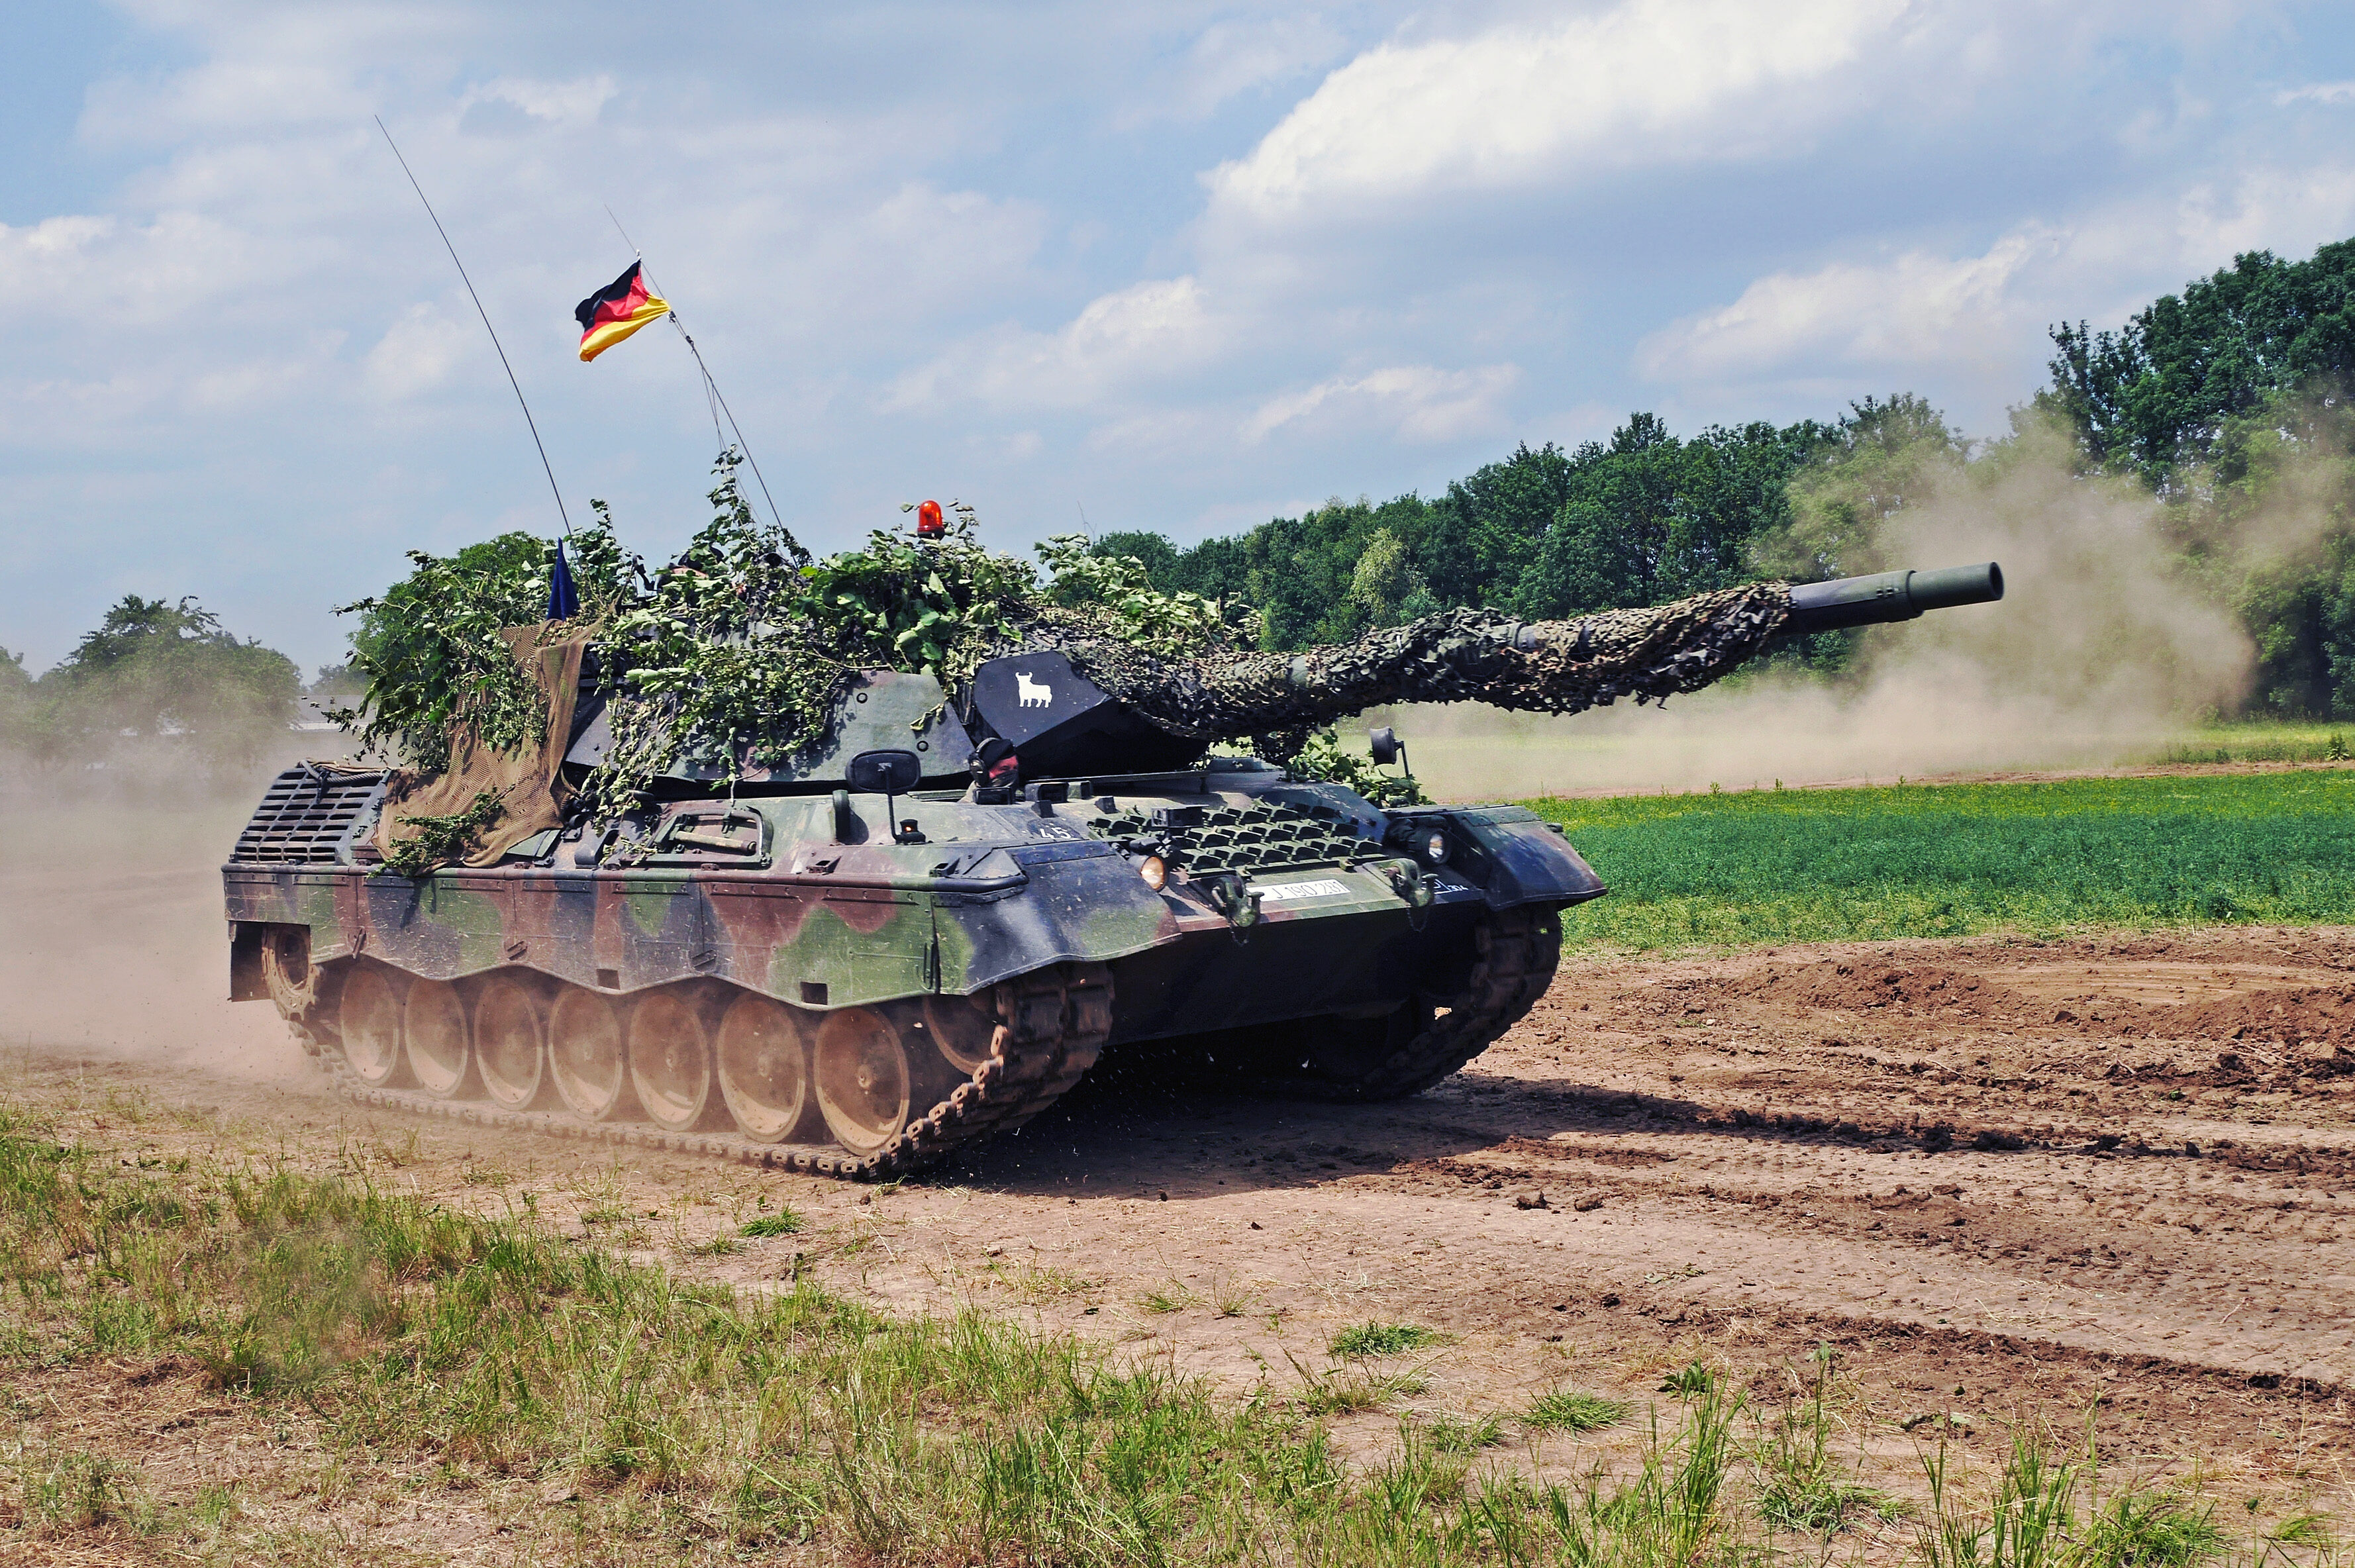 Germany Approves Delivery Of Leopard 1 Main Battle Tanks To Ukraine